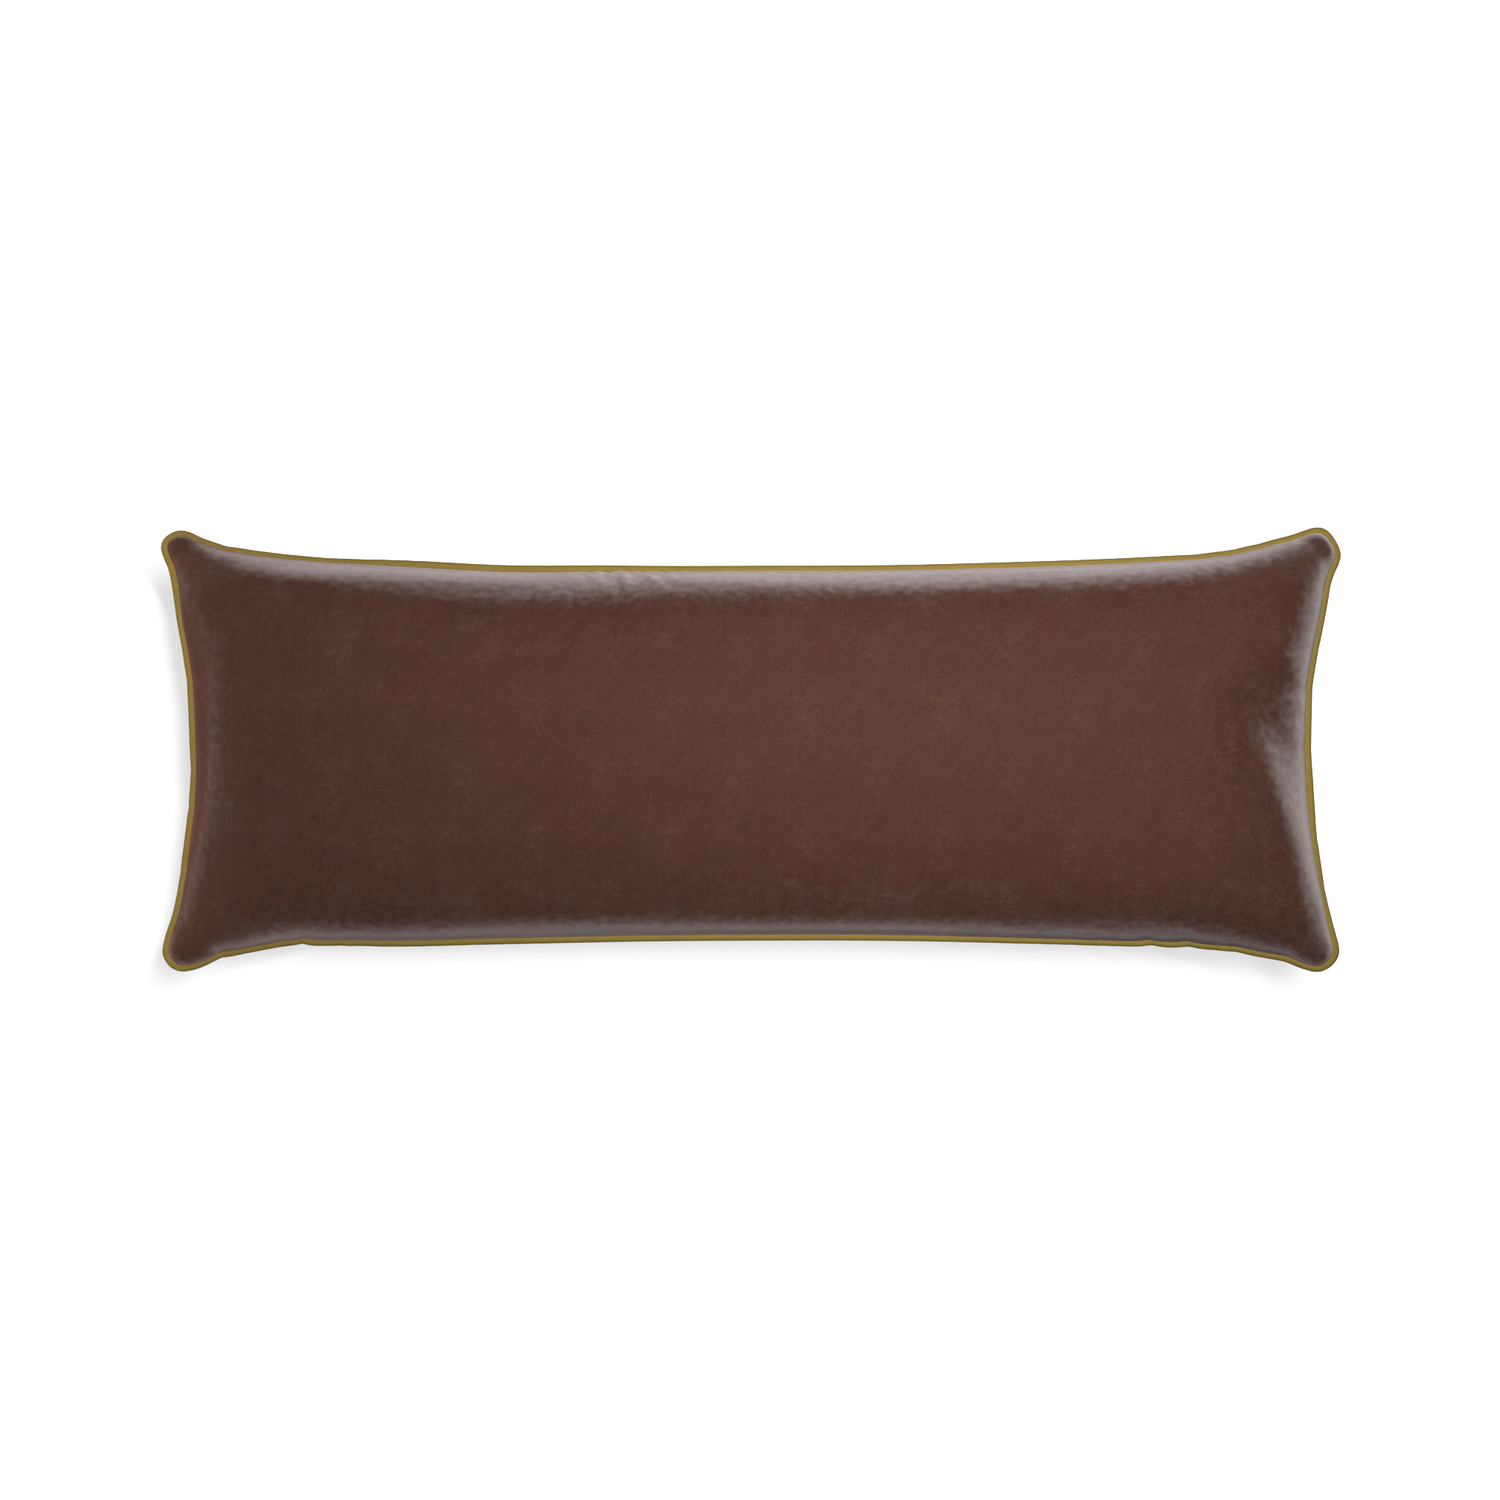 Xl-lumbar walnut velvet custom brownpillow with c piping on white background